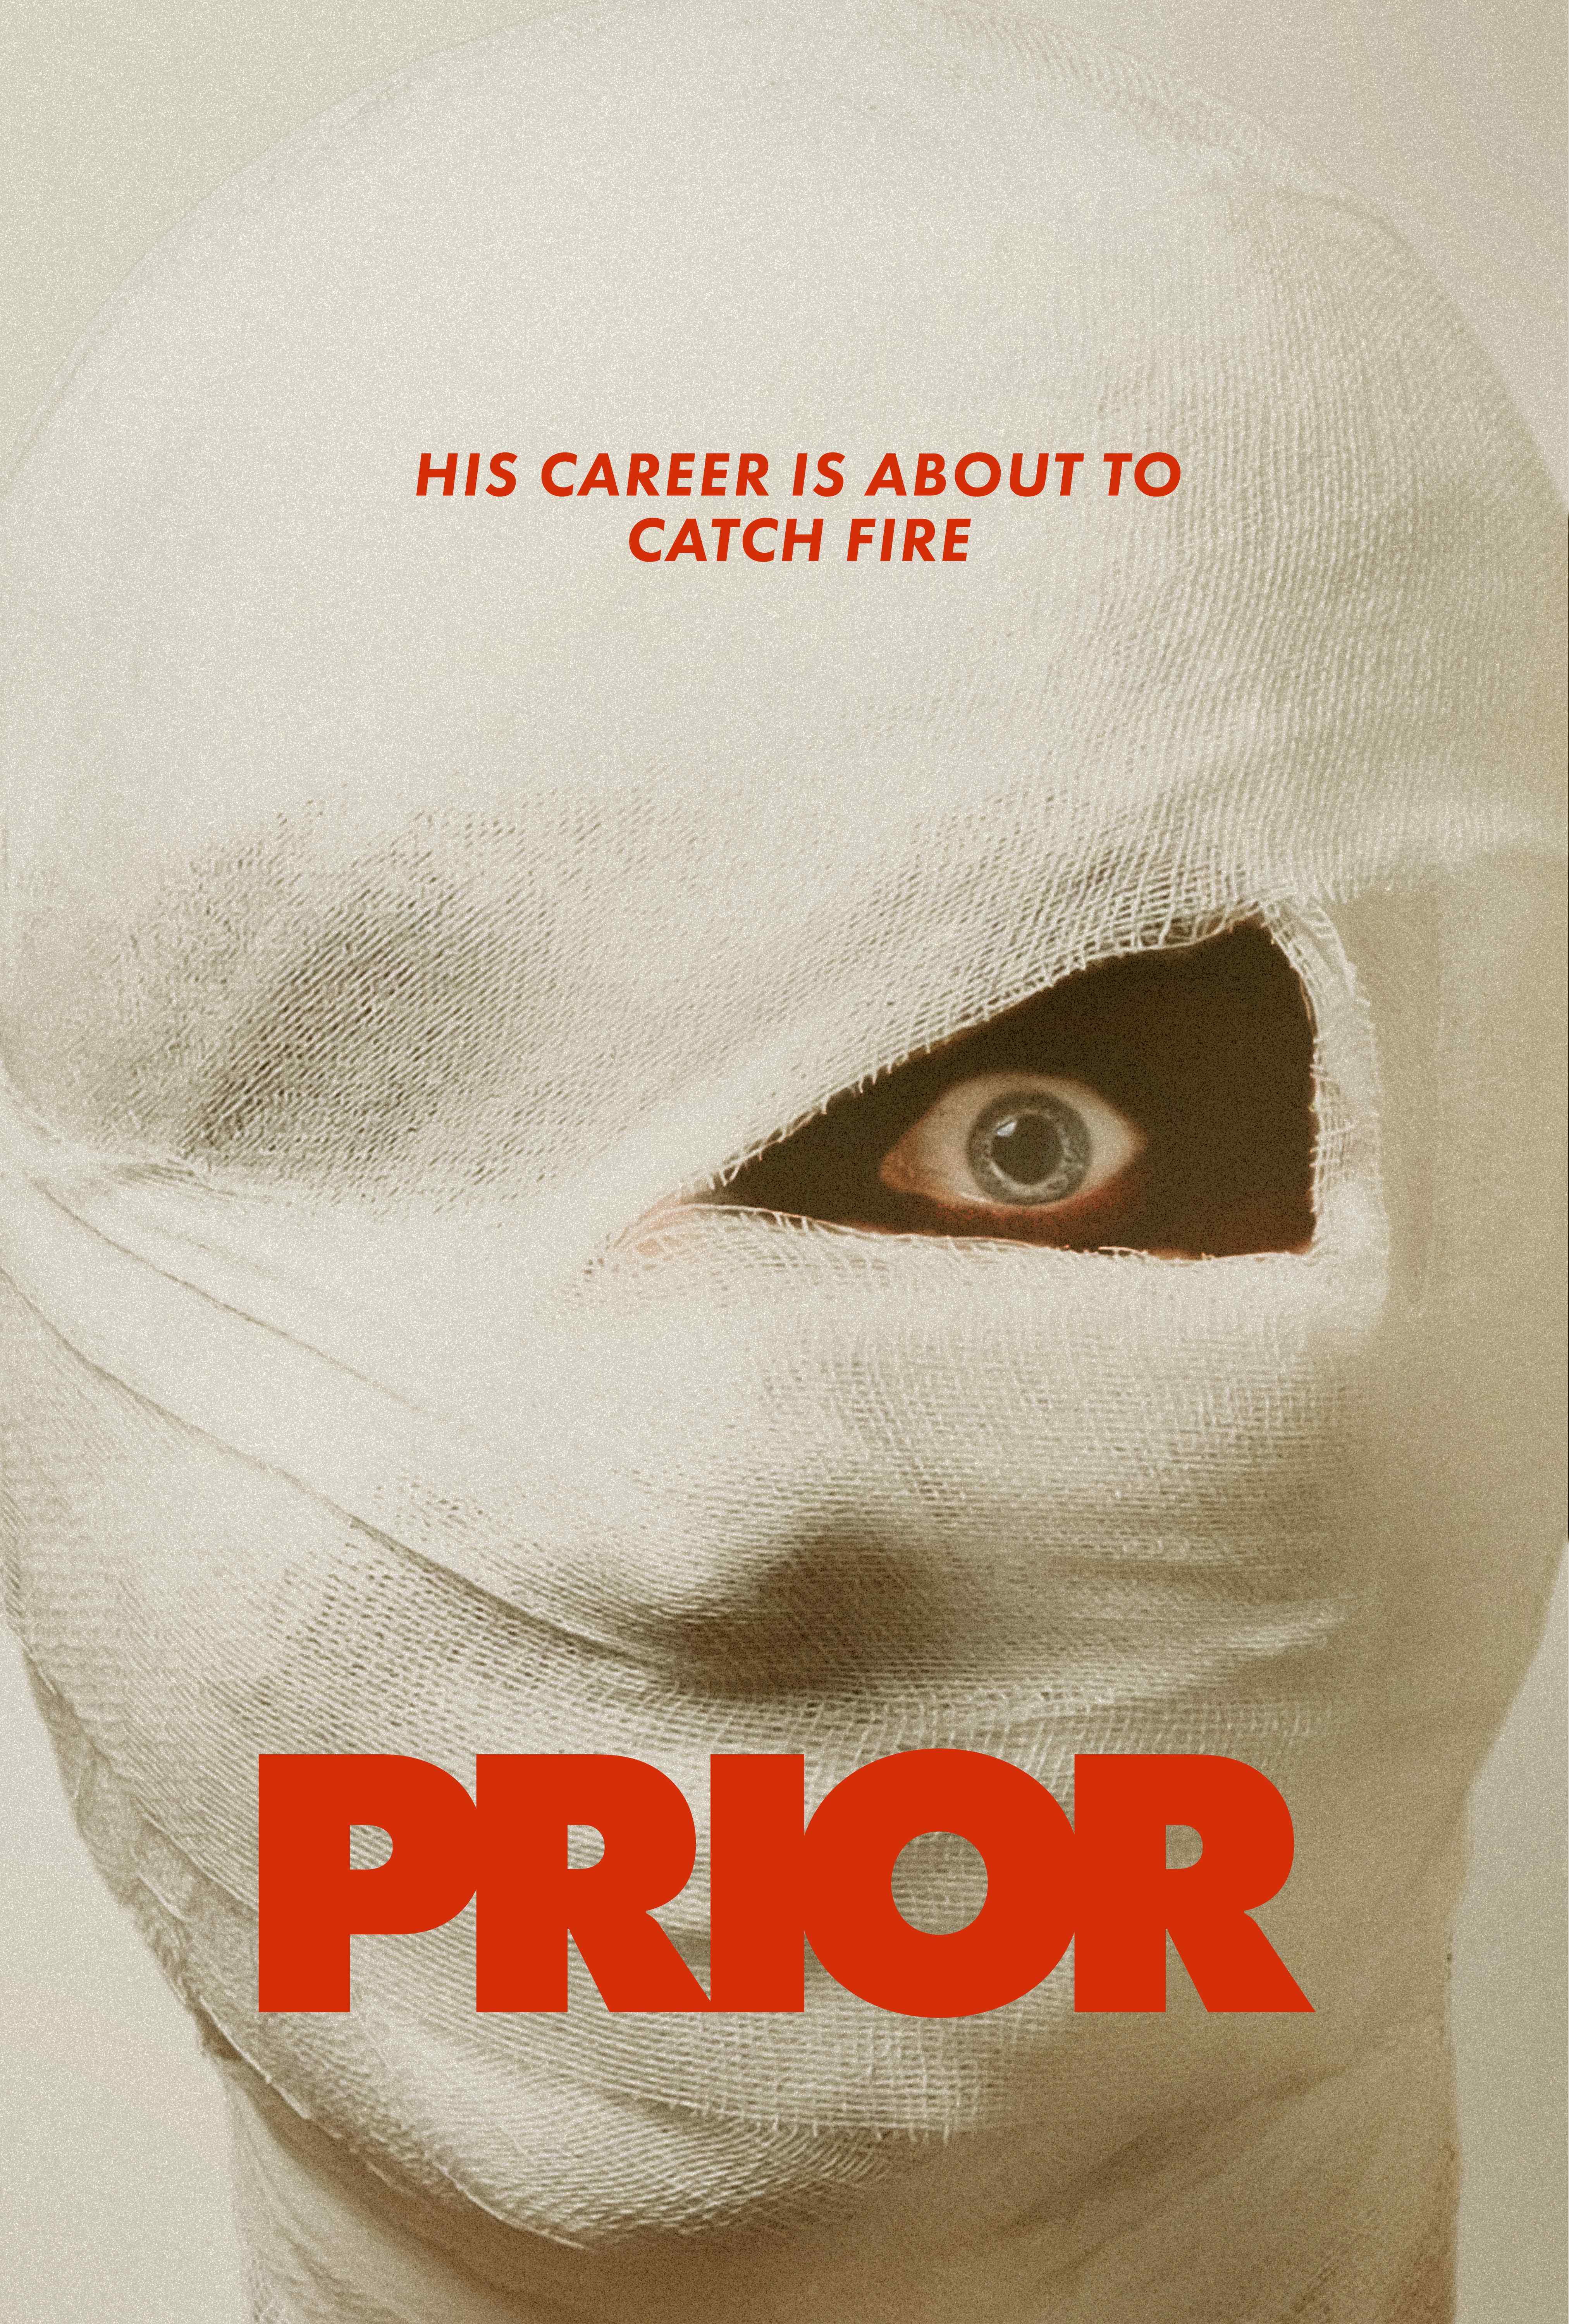 Fire Breathing Films Announces Official Release of PRIOR, The Movie,  A World-Class Comedy Production